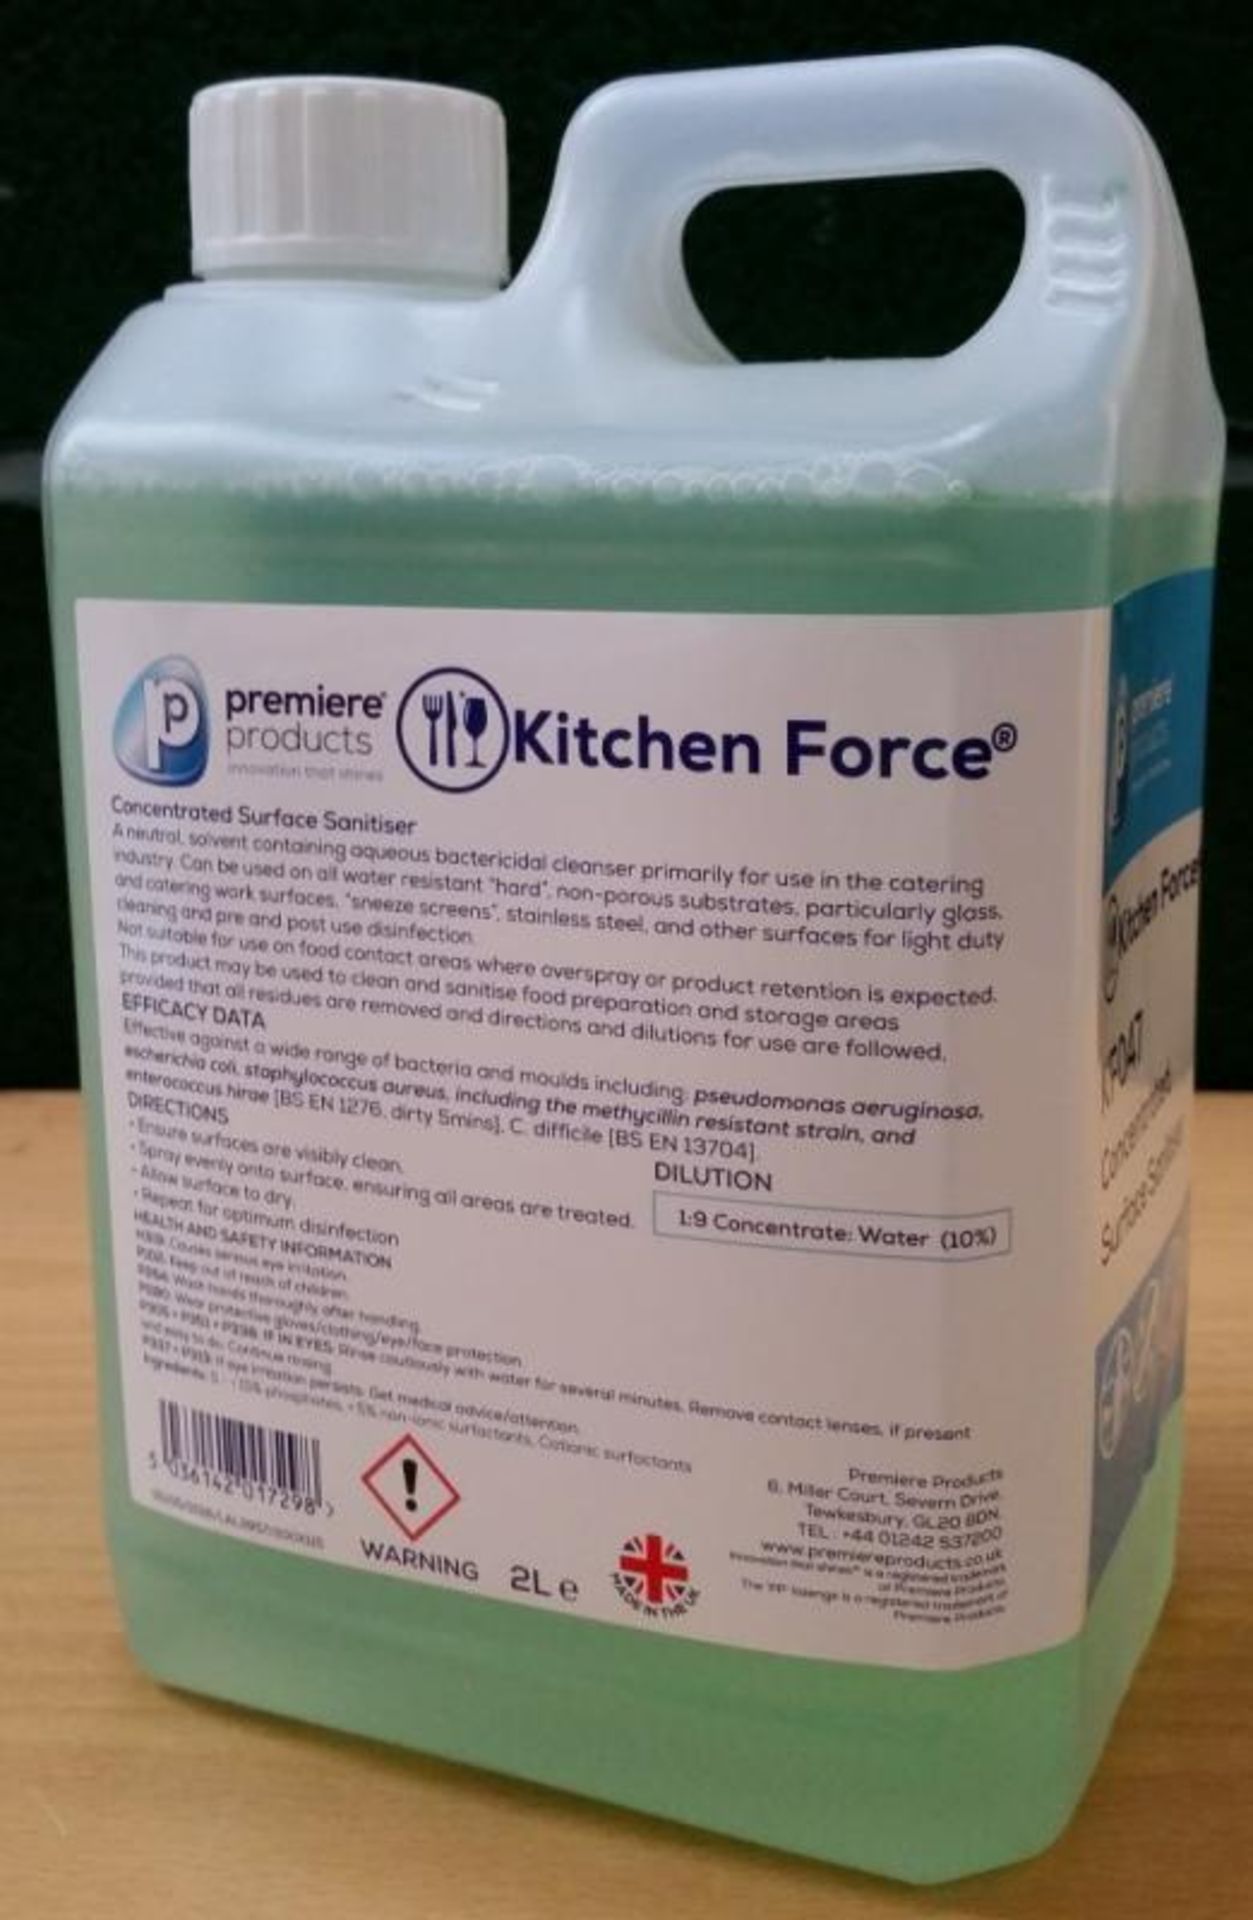 4 x Premiere Kitchen Force 2 Litre Concentrated Surface Sanitiser - Suitable For Foaming Dispnesers